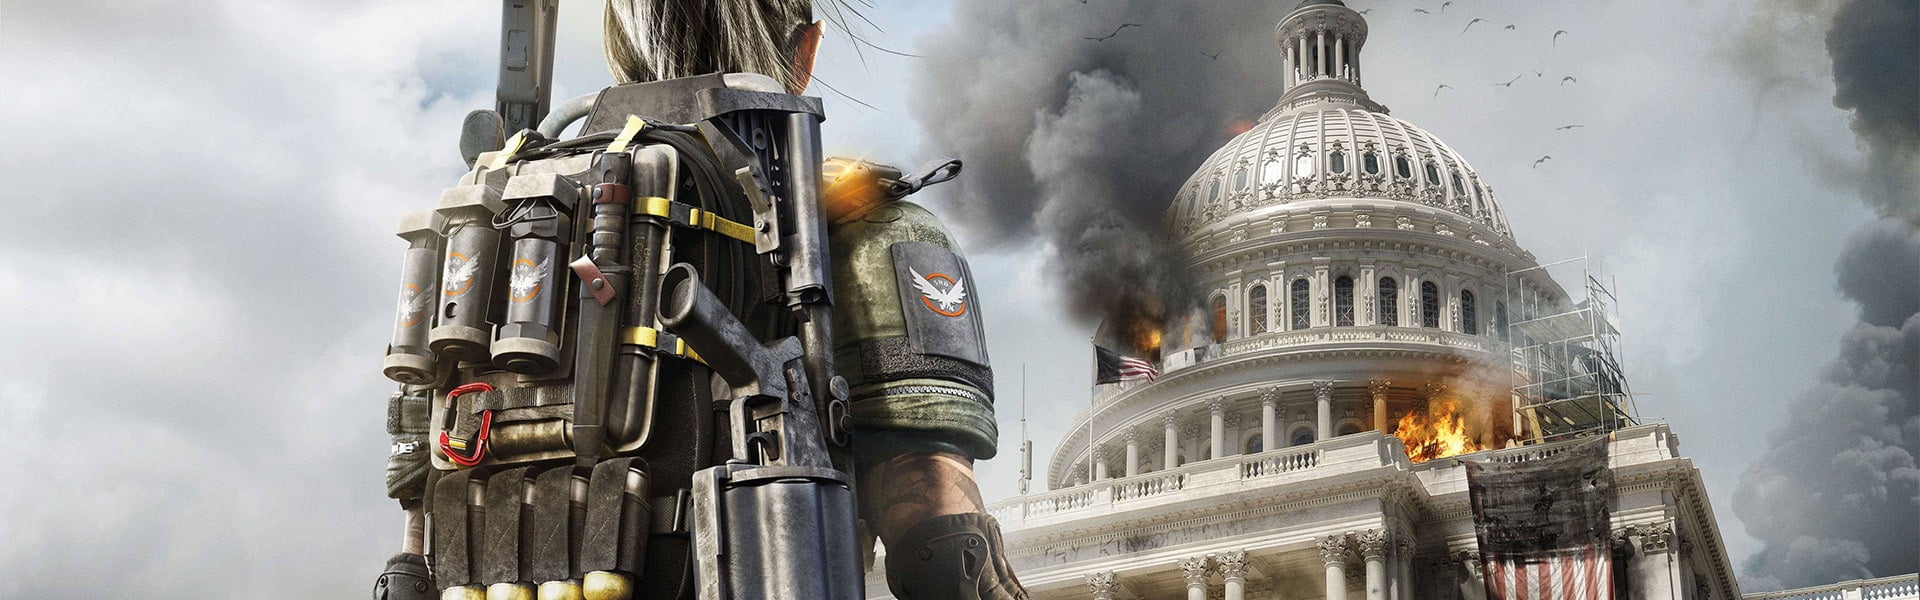 Tom Clancy's The Division 2 Review 14